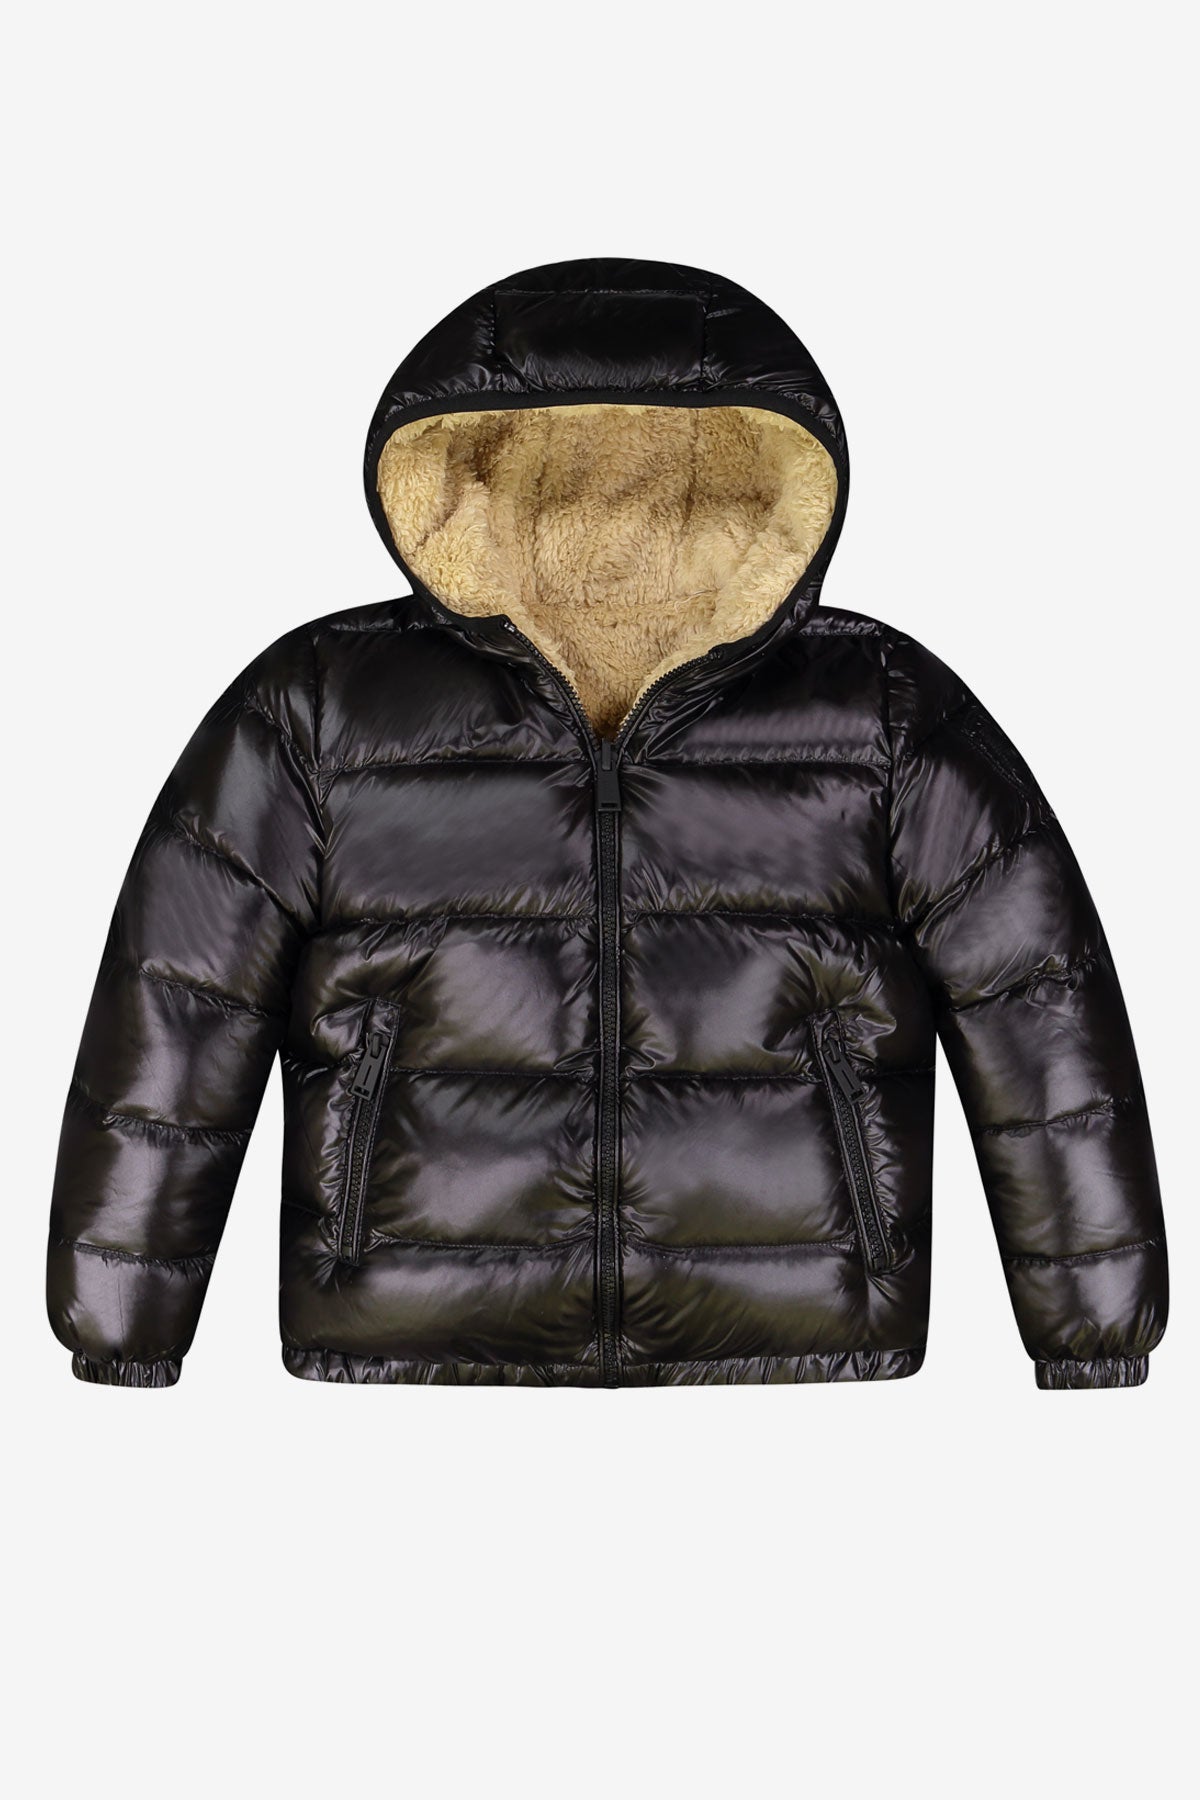 Boys Jackets, Coats and Outerwear - Mini Ruby